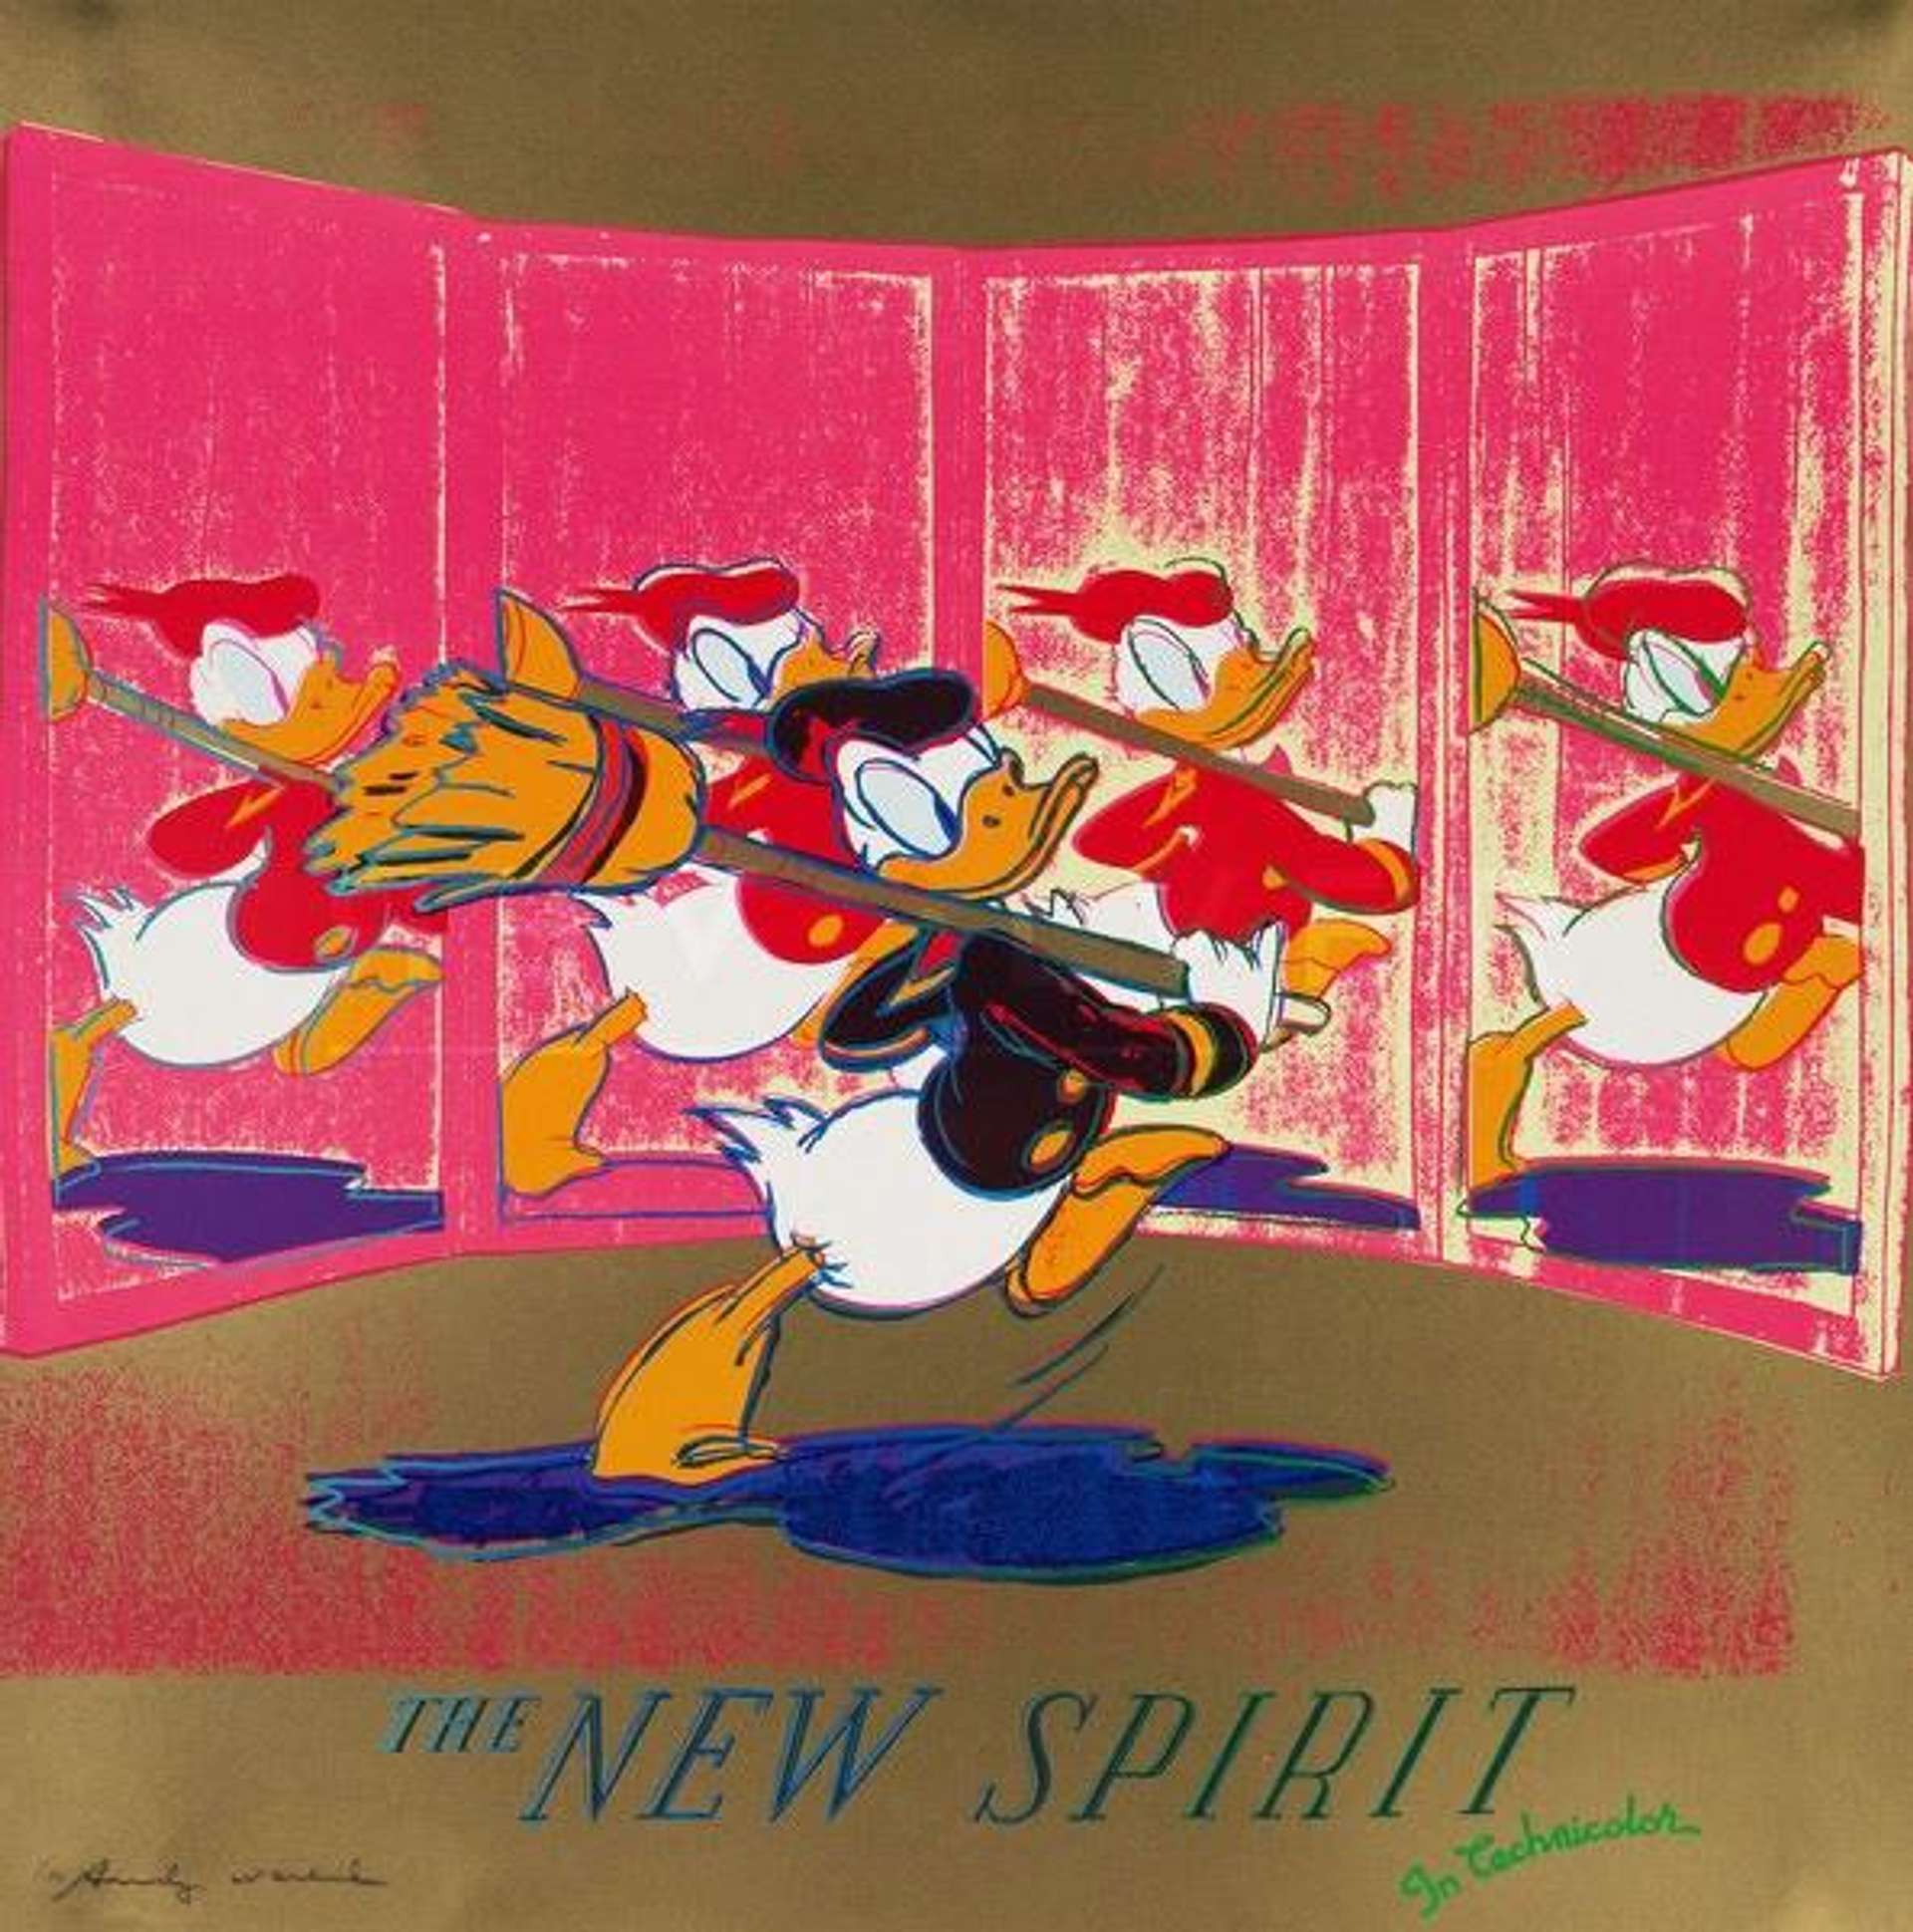 Andy Warhol: The New Spirit (Donald Duck) (F. & S. II.357) - Signed Print